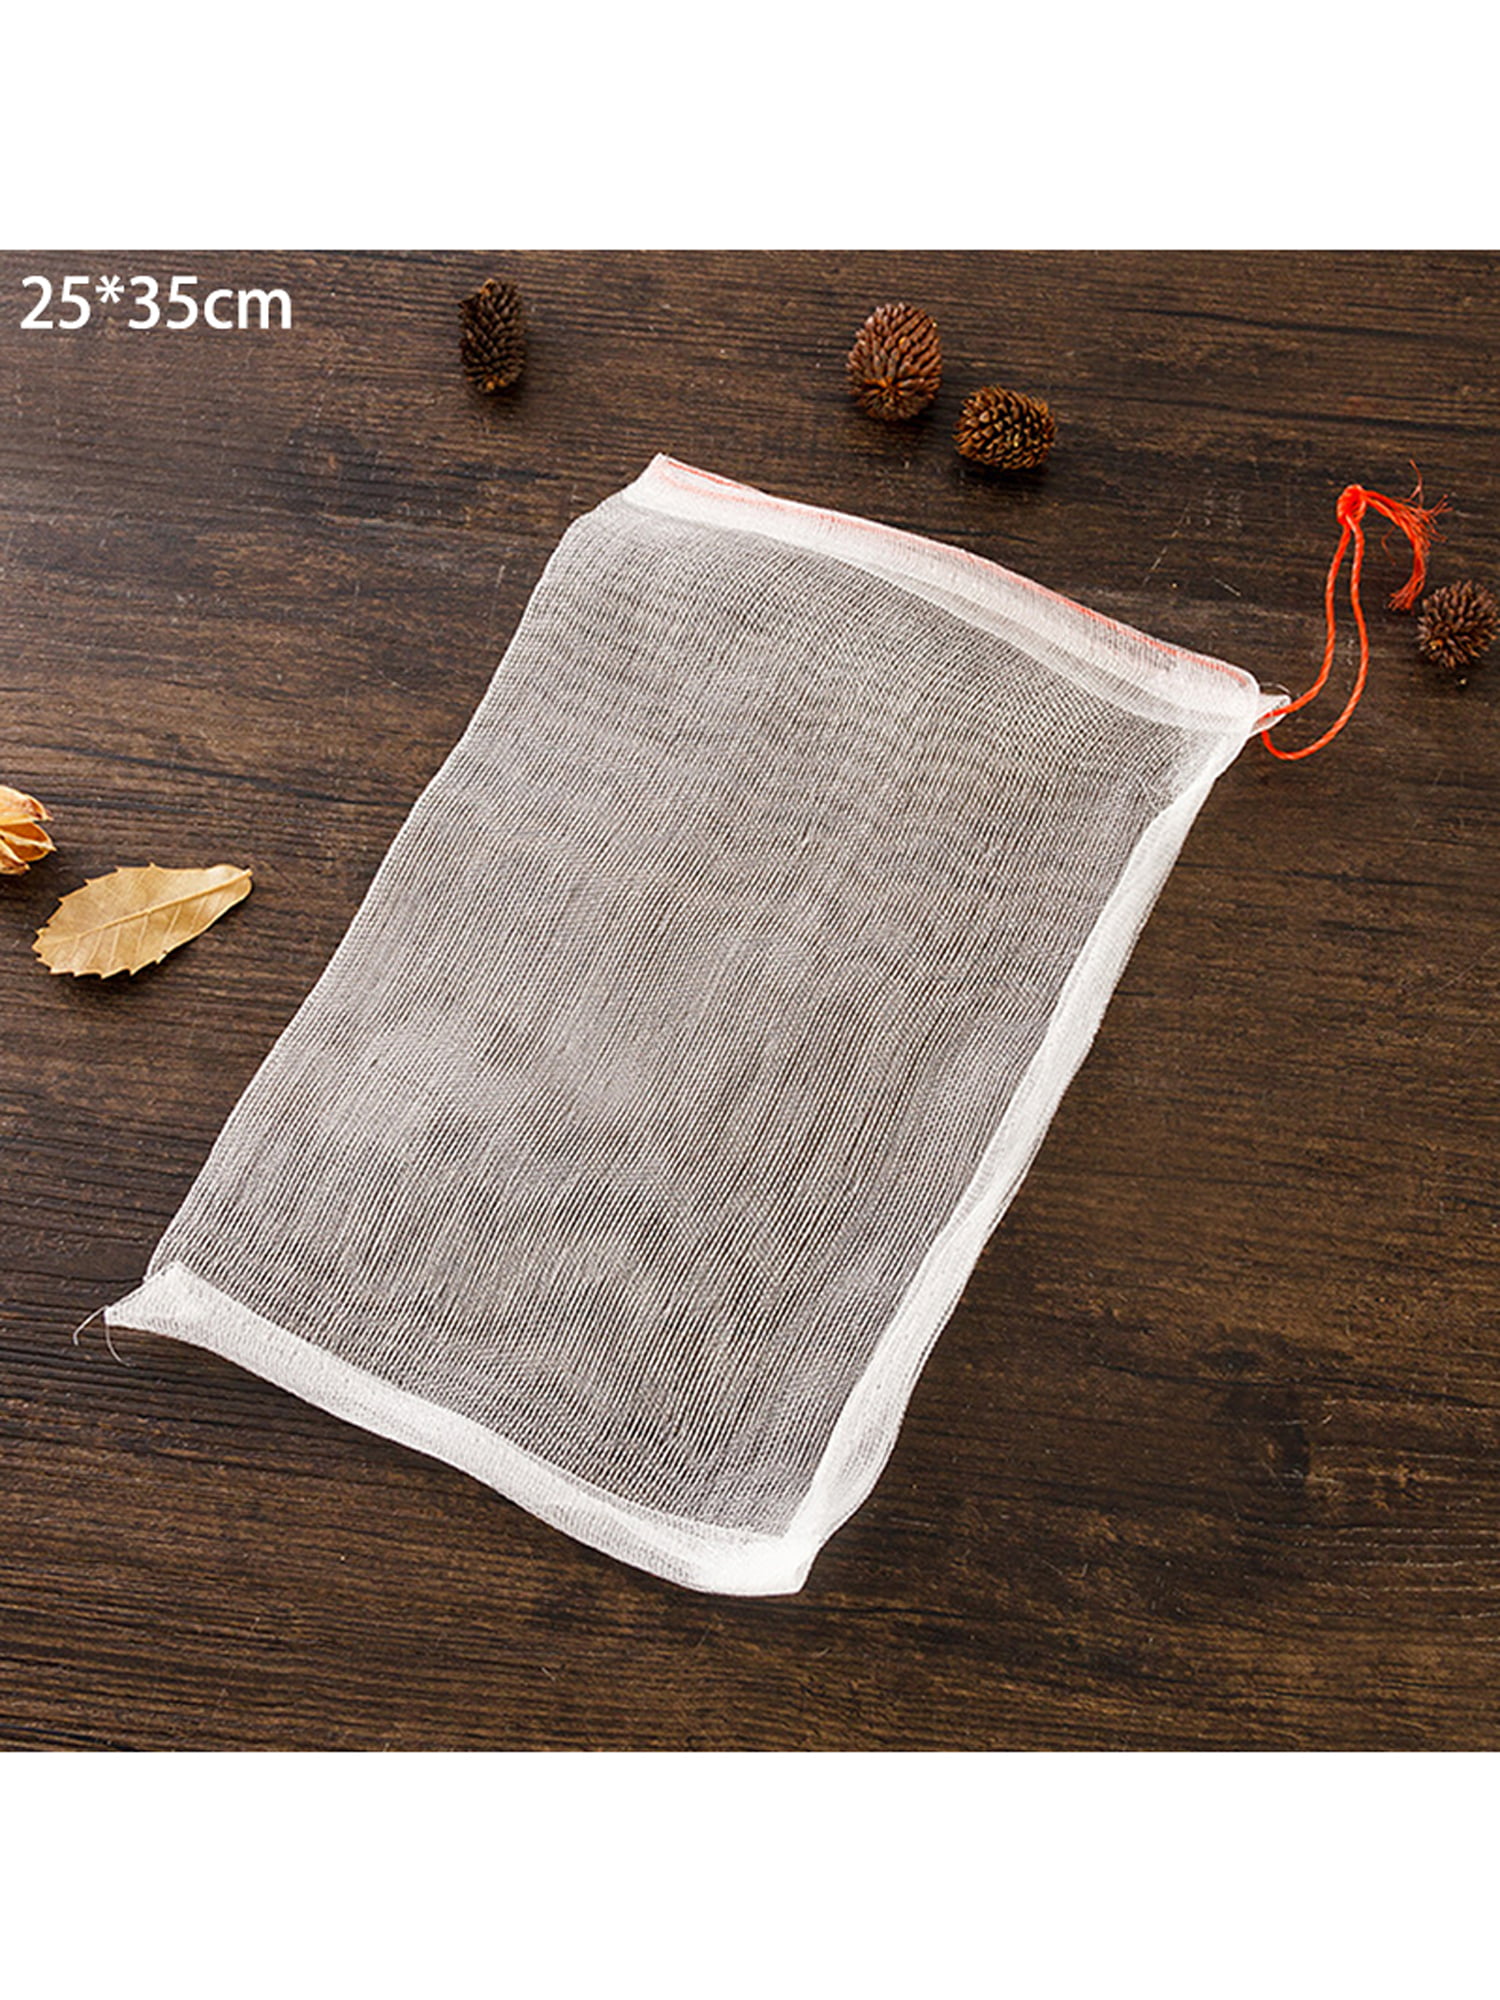 50PCS Fruit Protection Netting Bags For Garden Plant Flower Against Insect Bird 